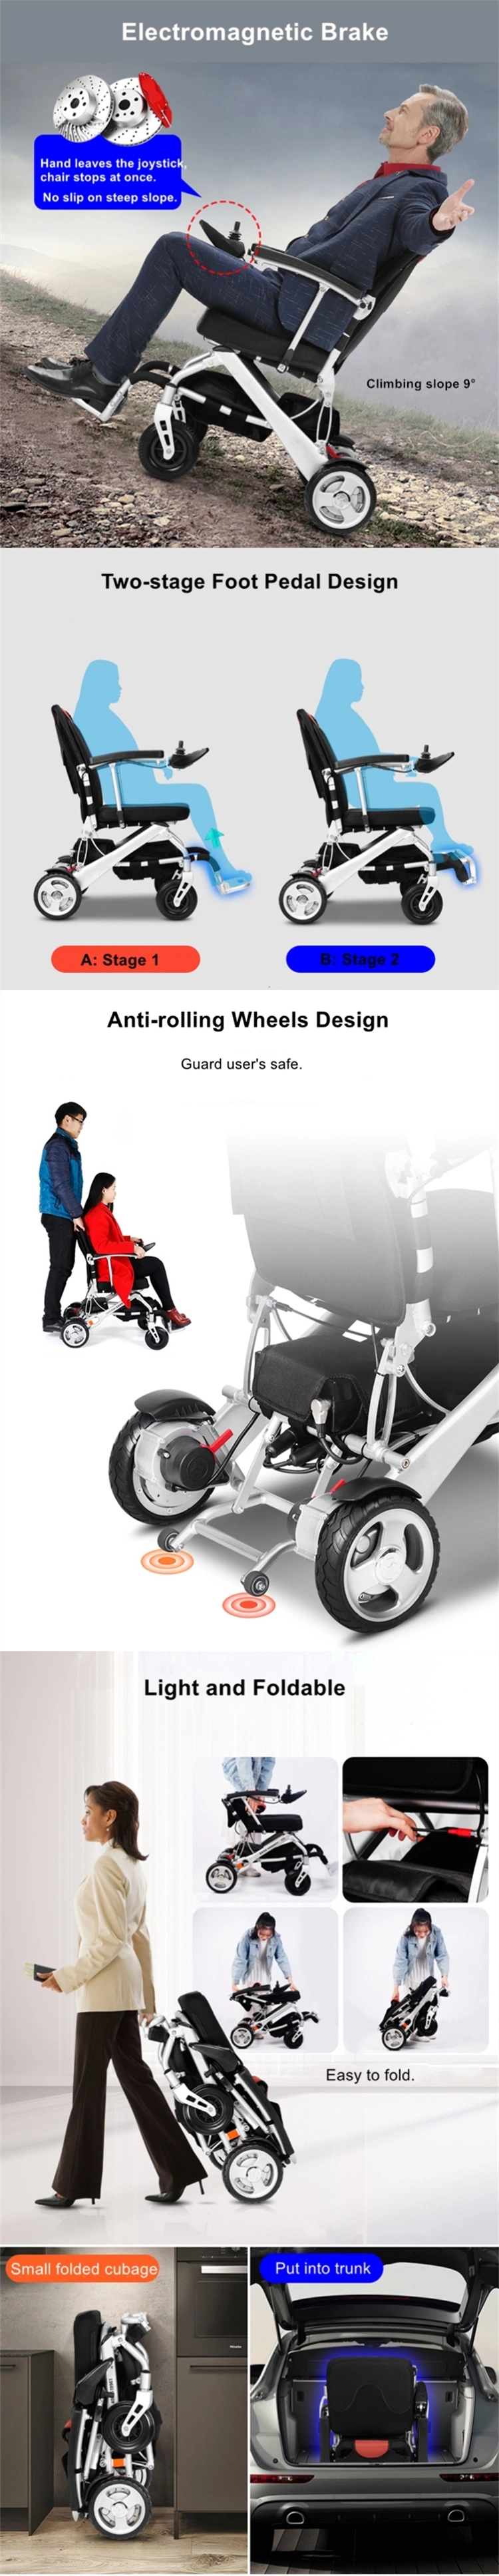 Compact Aluminium Alloy 21kg Lightweight Reclining Electric Wheelchair for Adults and Children